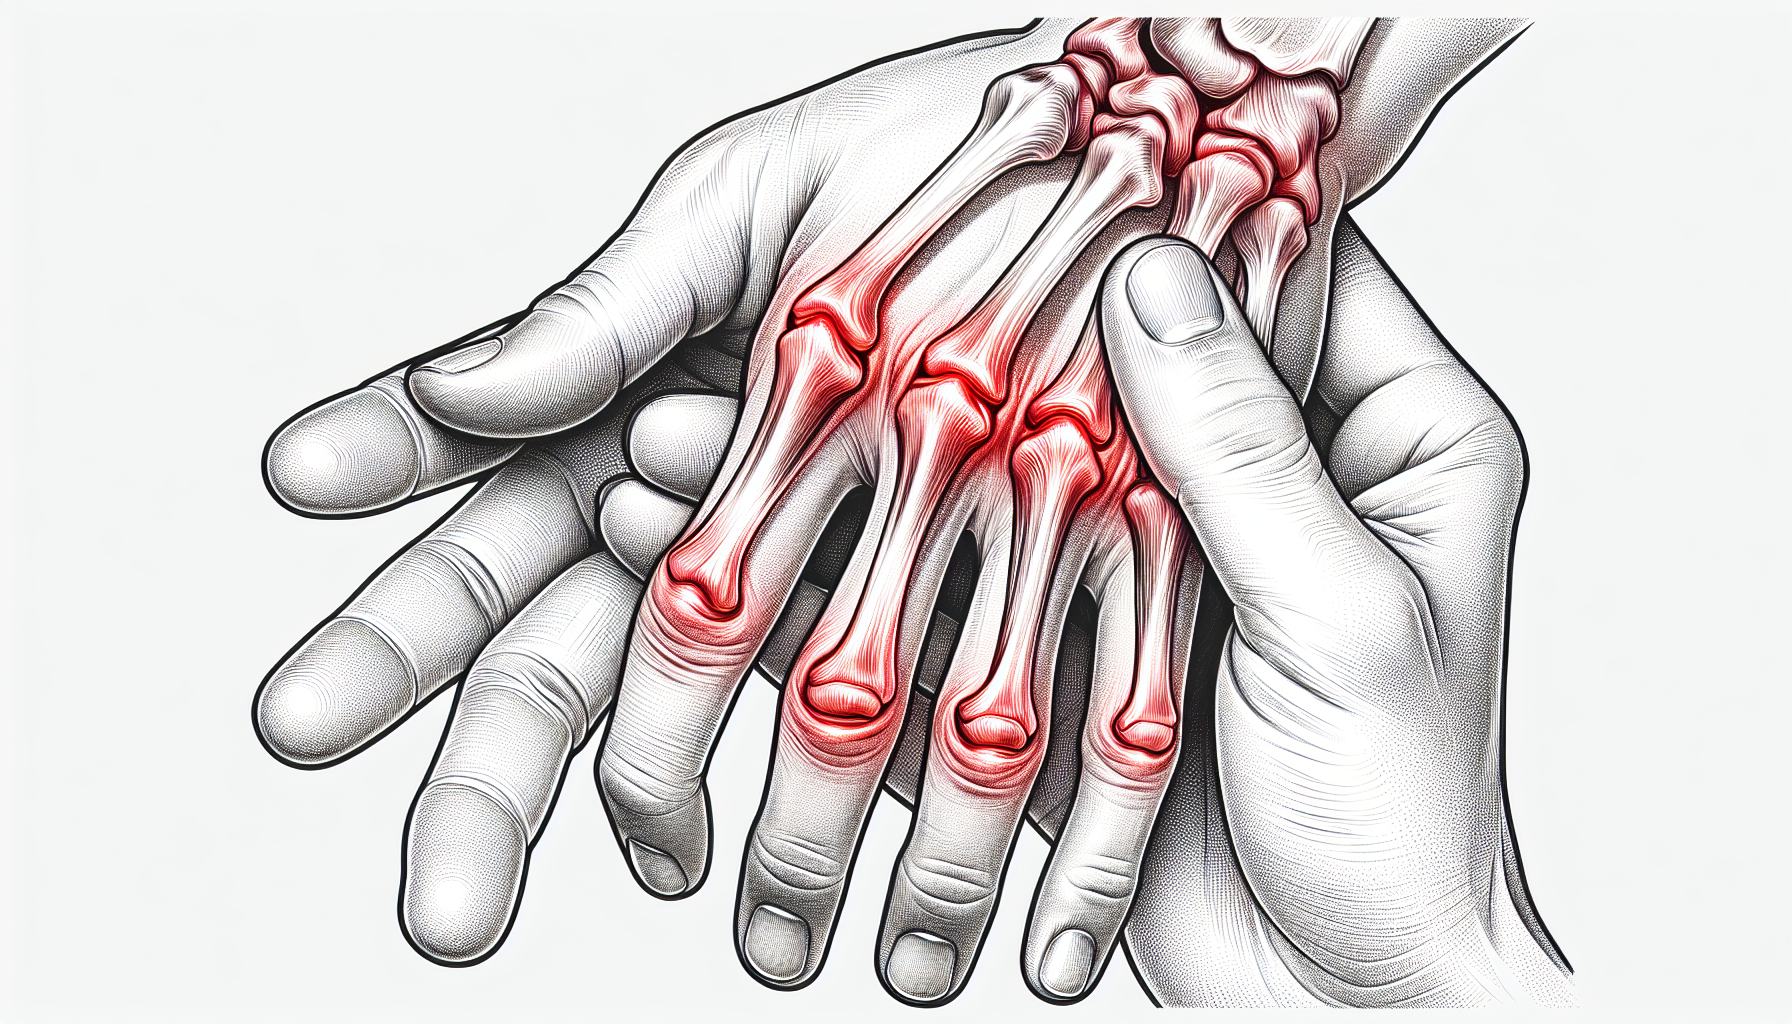 Can I Live Long With Arthritis?